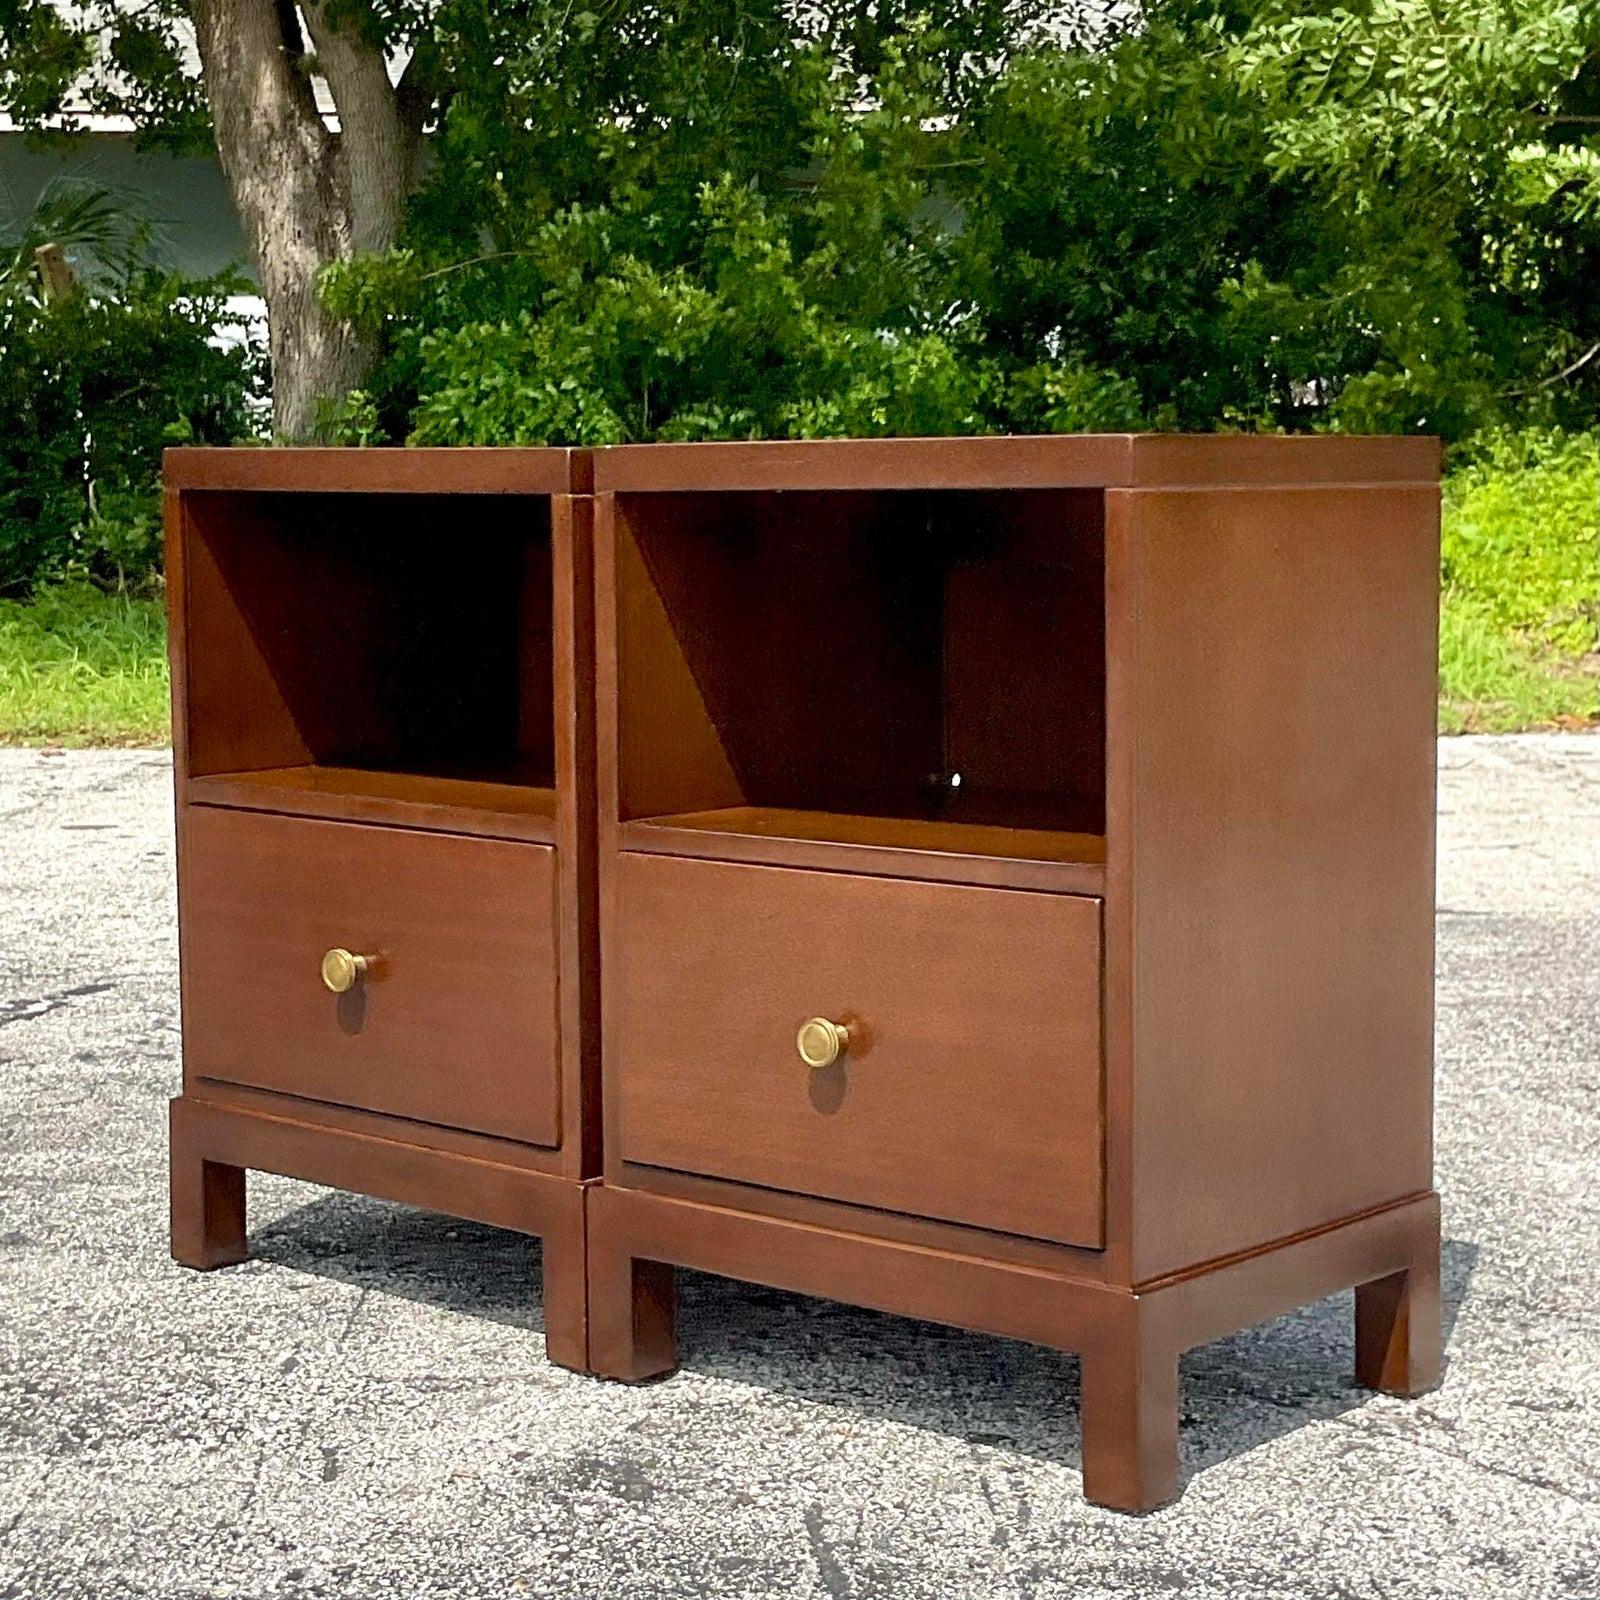 North American Mid 20th Century Vintage John Widdicomb Nightstands - a Pair For Sale